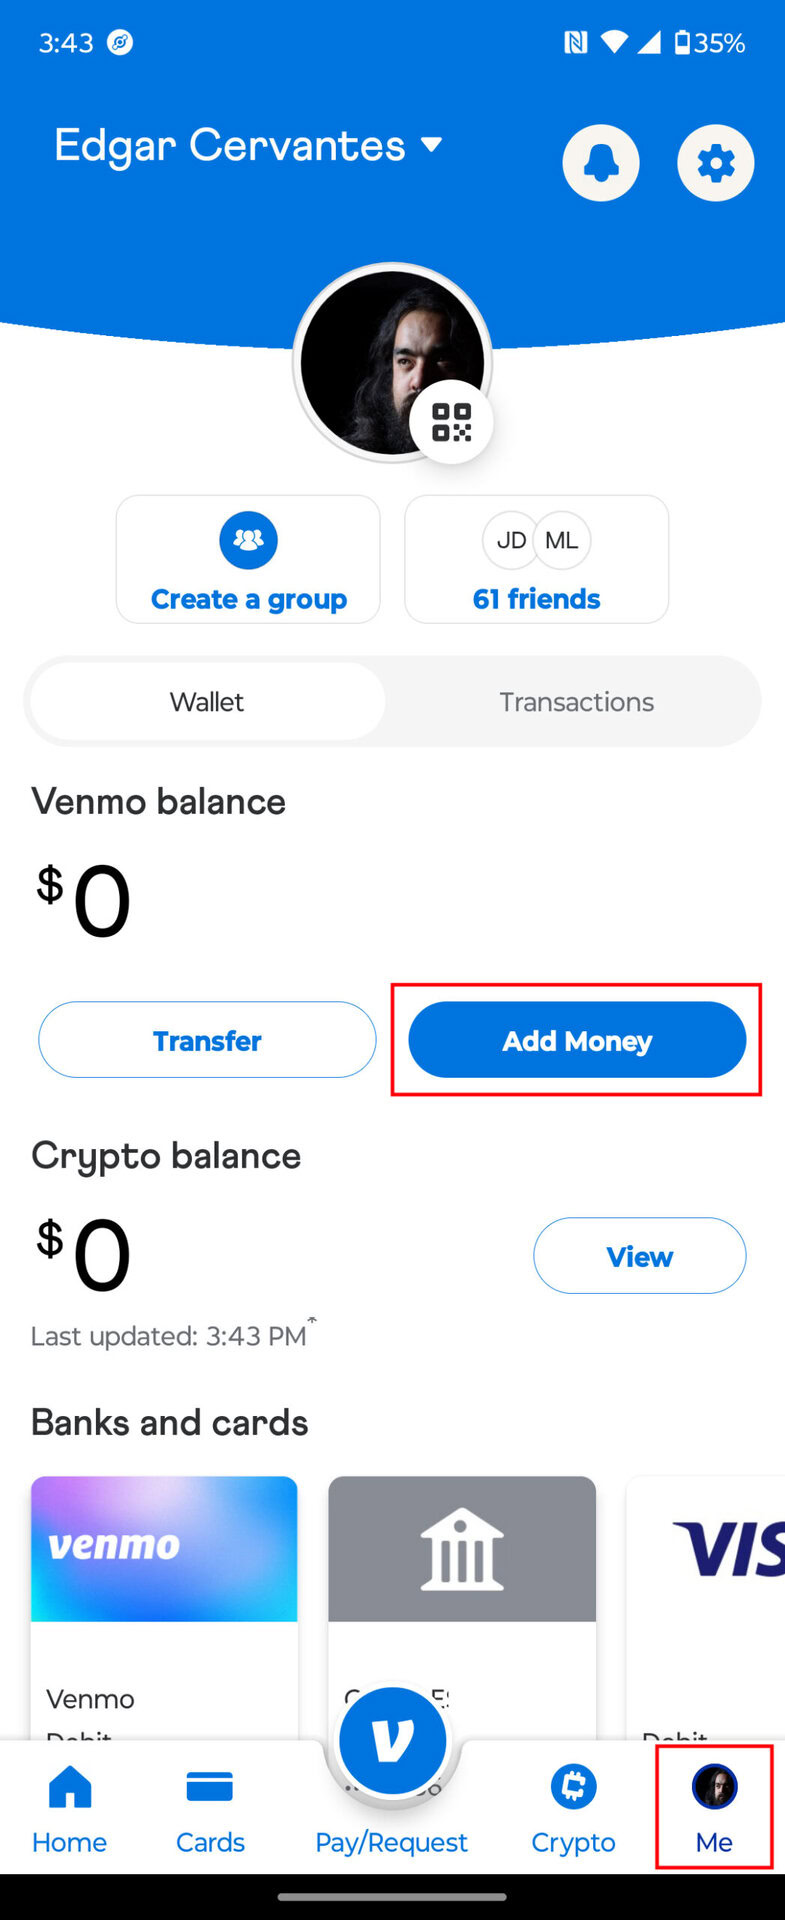 How to add funds to your Venmo balance (1)